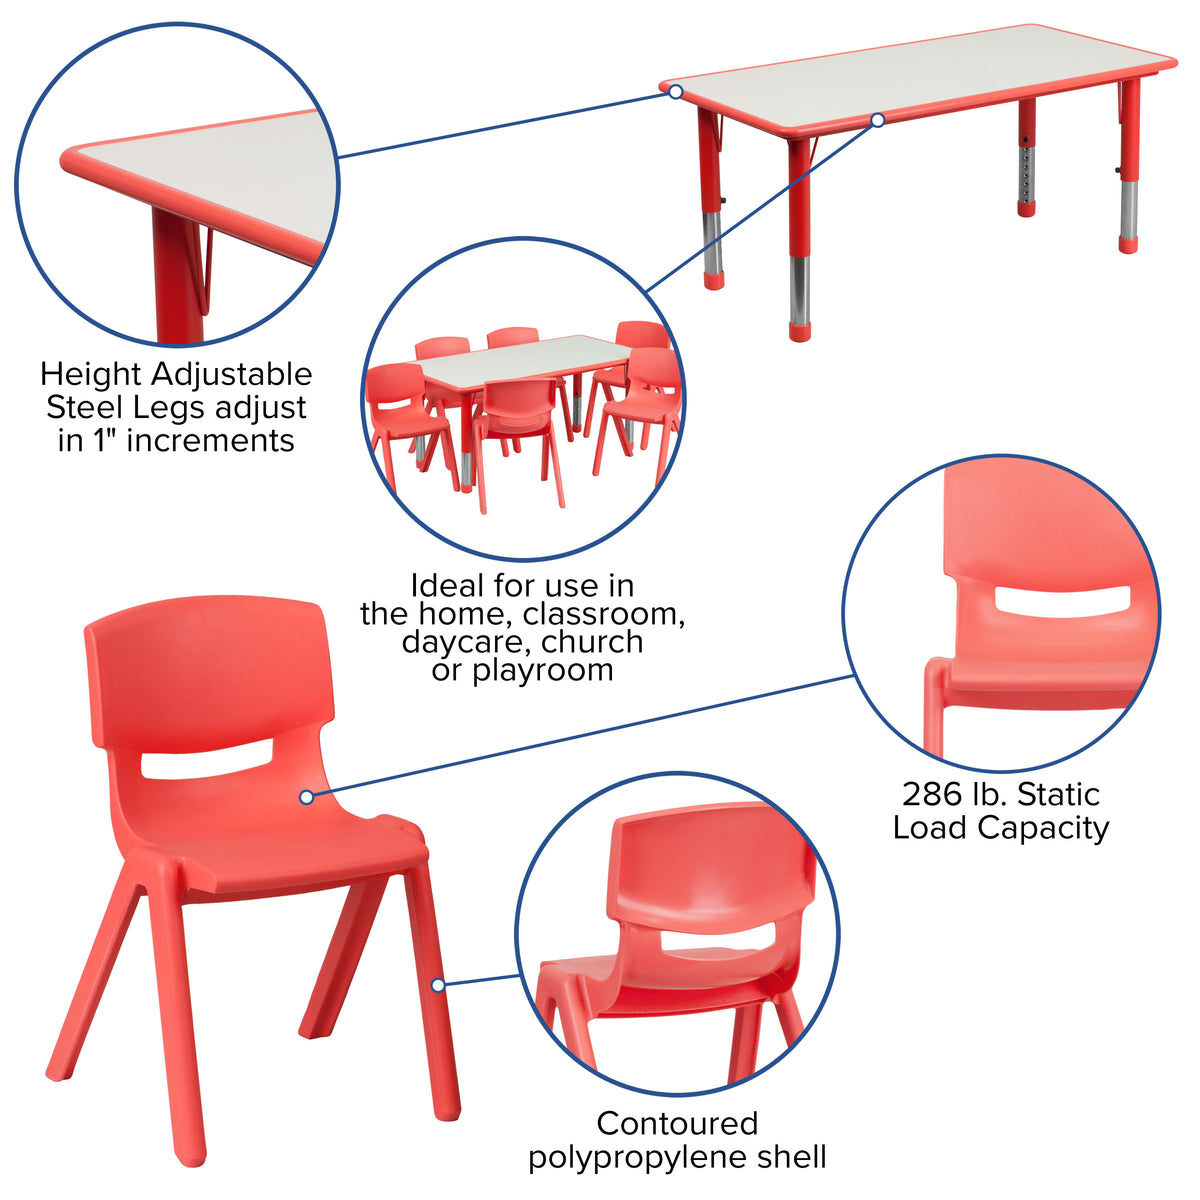 Red |#| 23.625inchW x 47.25inchL Rectangular Red Plastic Activity Table Set with 6 Chairs